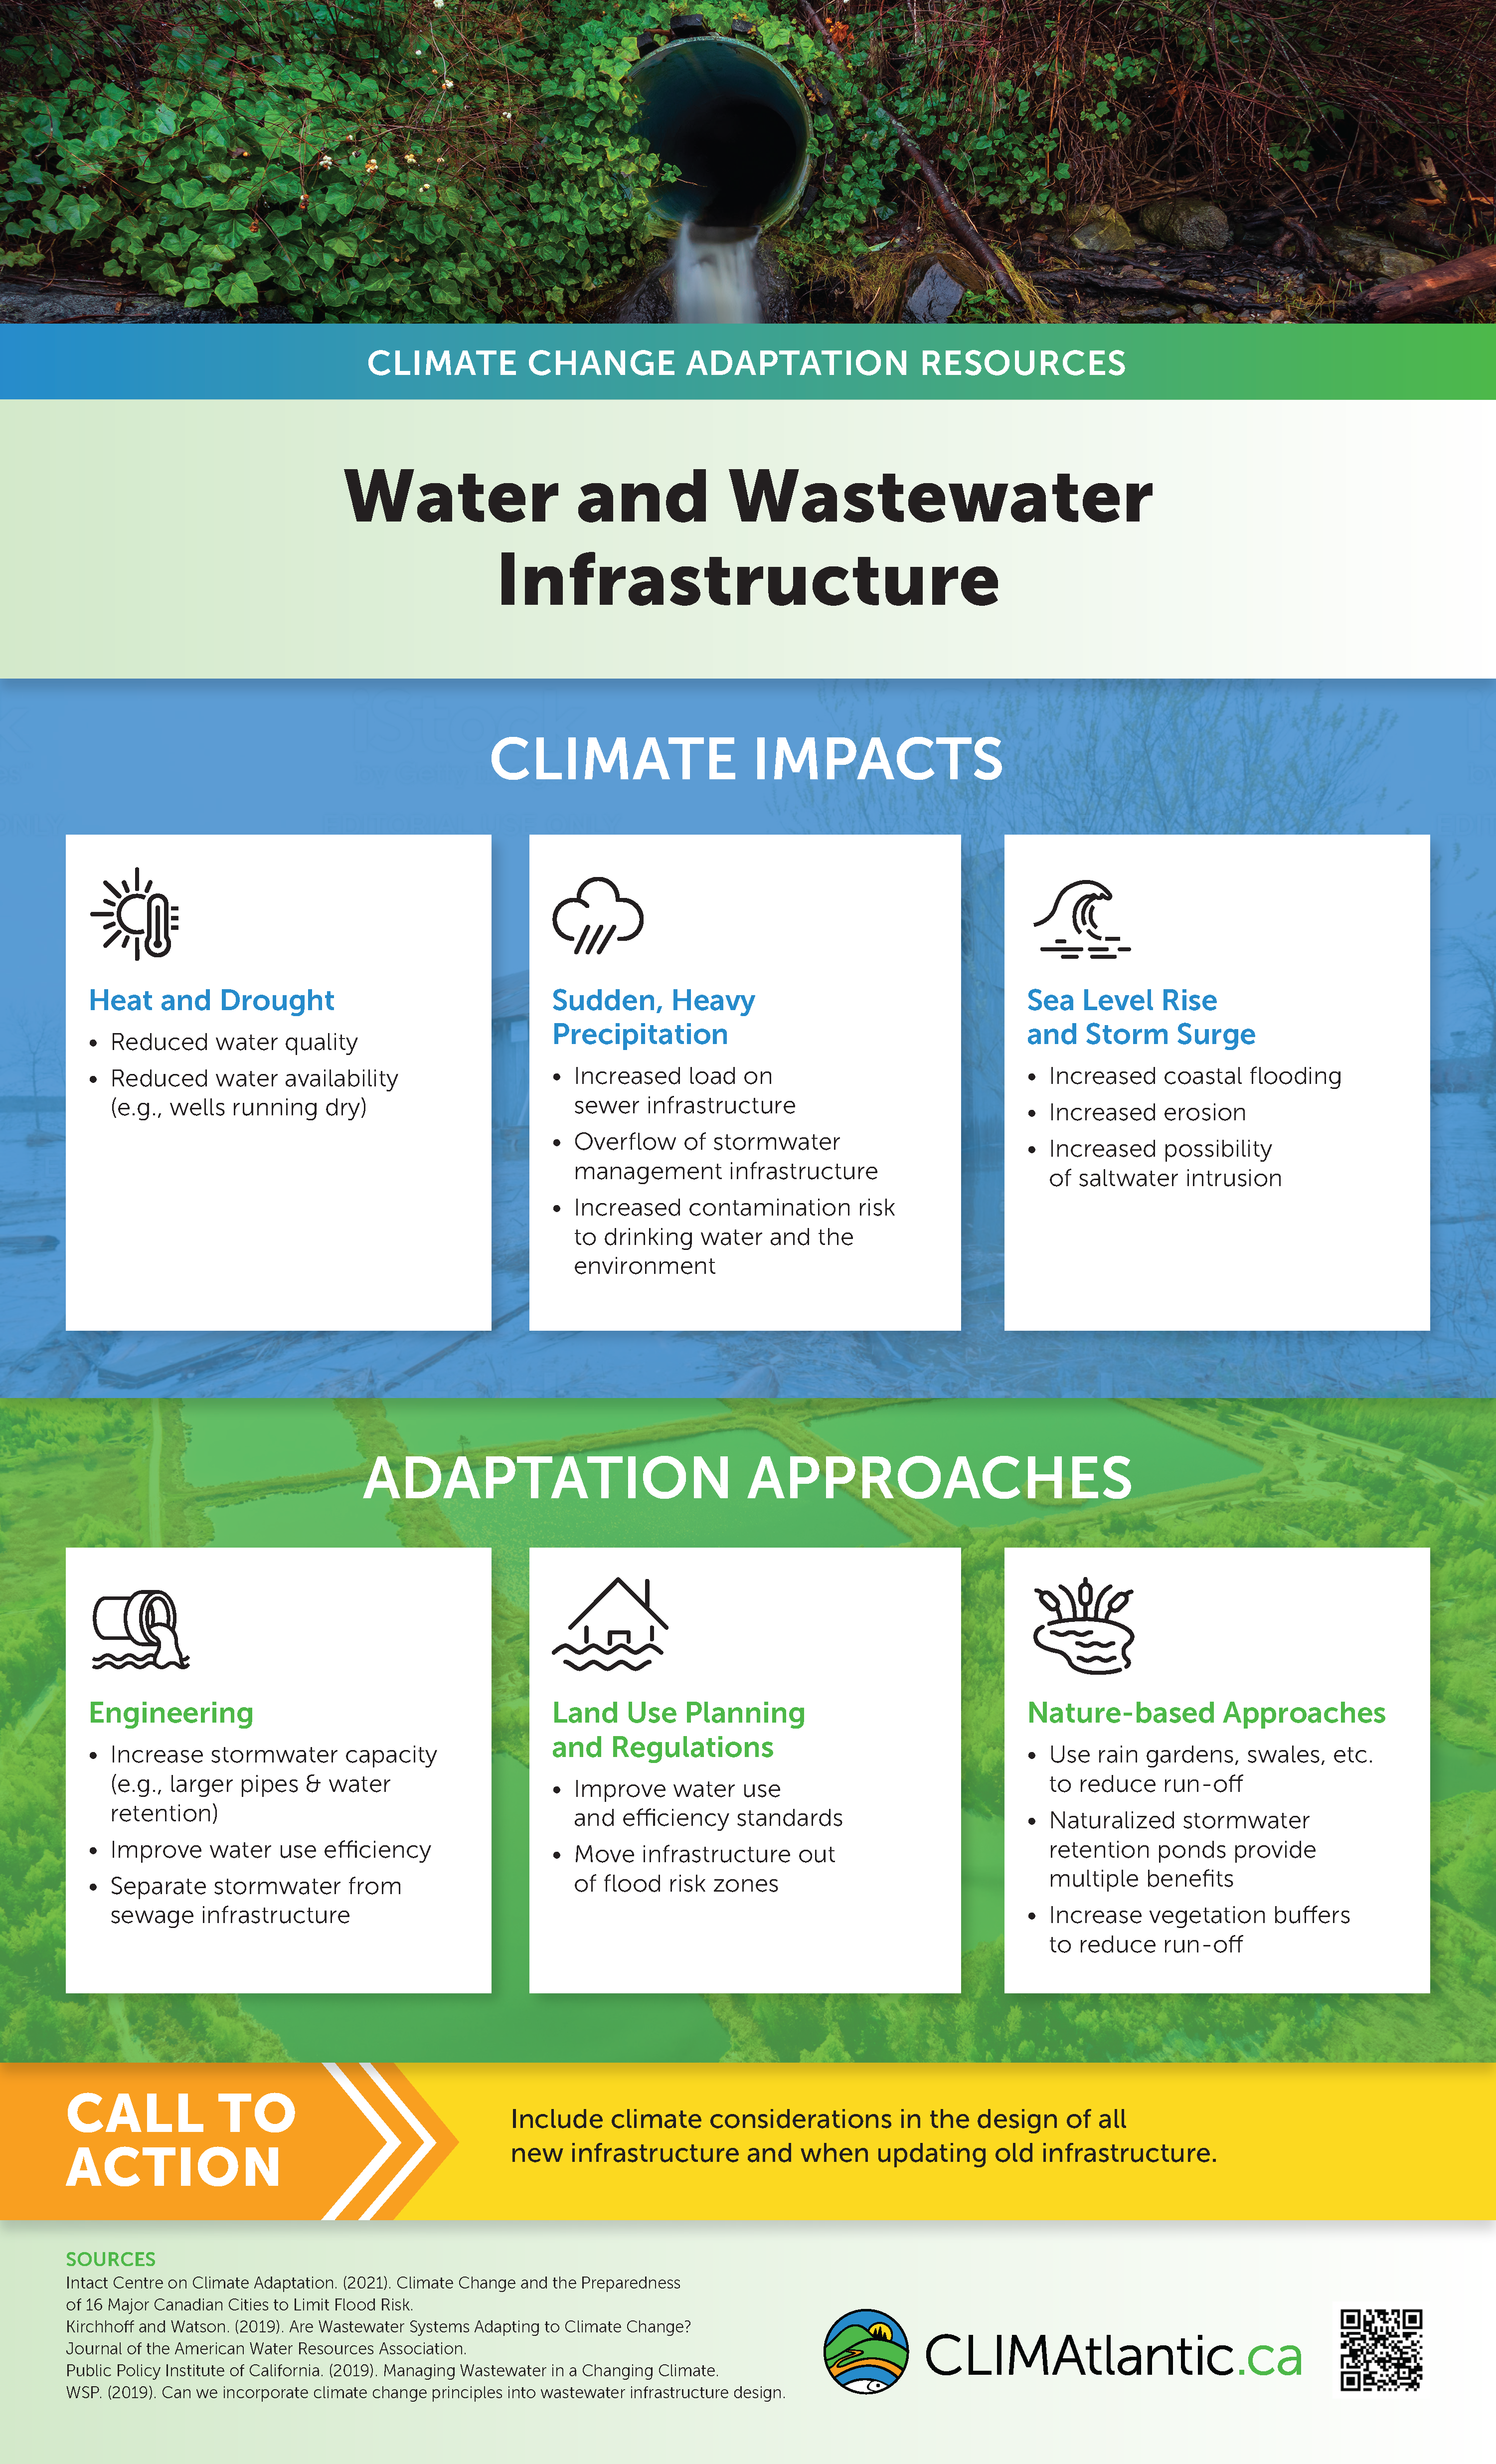 An infographic explaining the impacts of climate change on water and wastewater infrastructuew and suggested adaptation approaches.